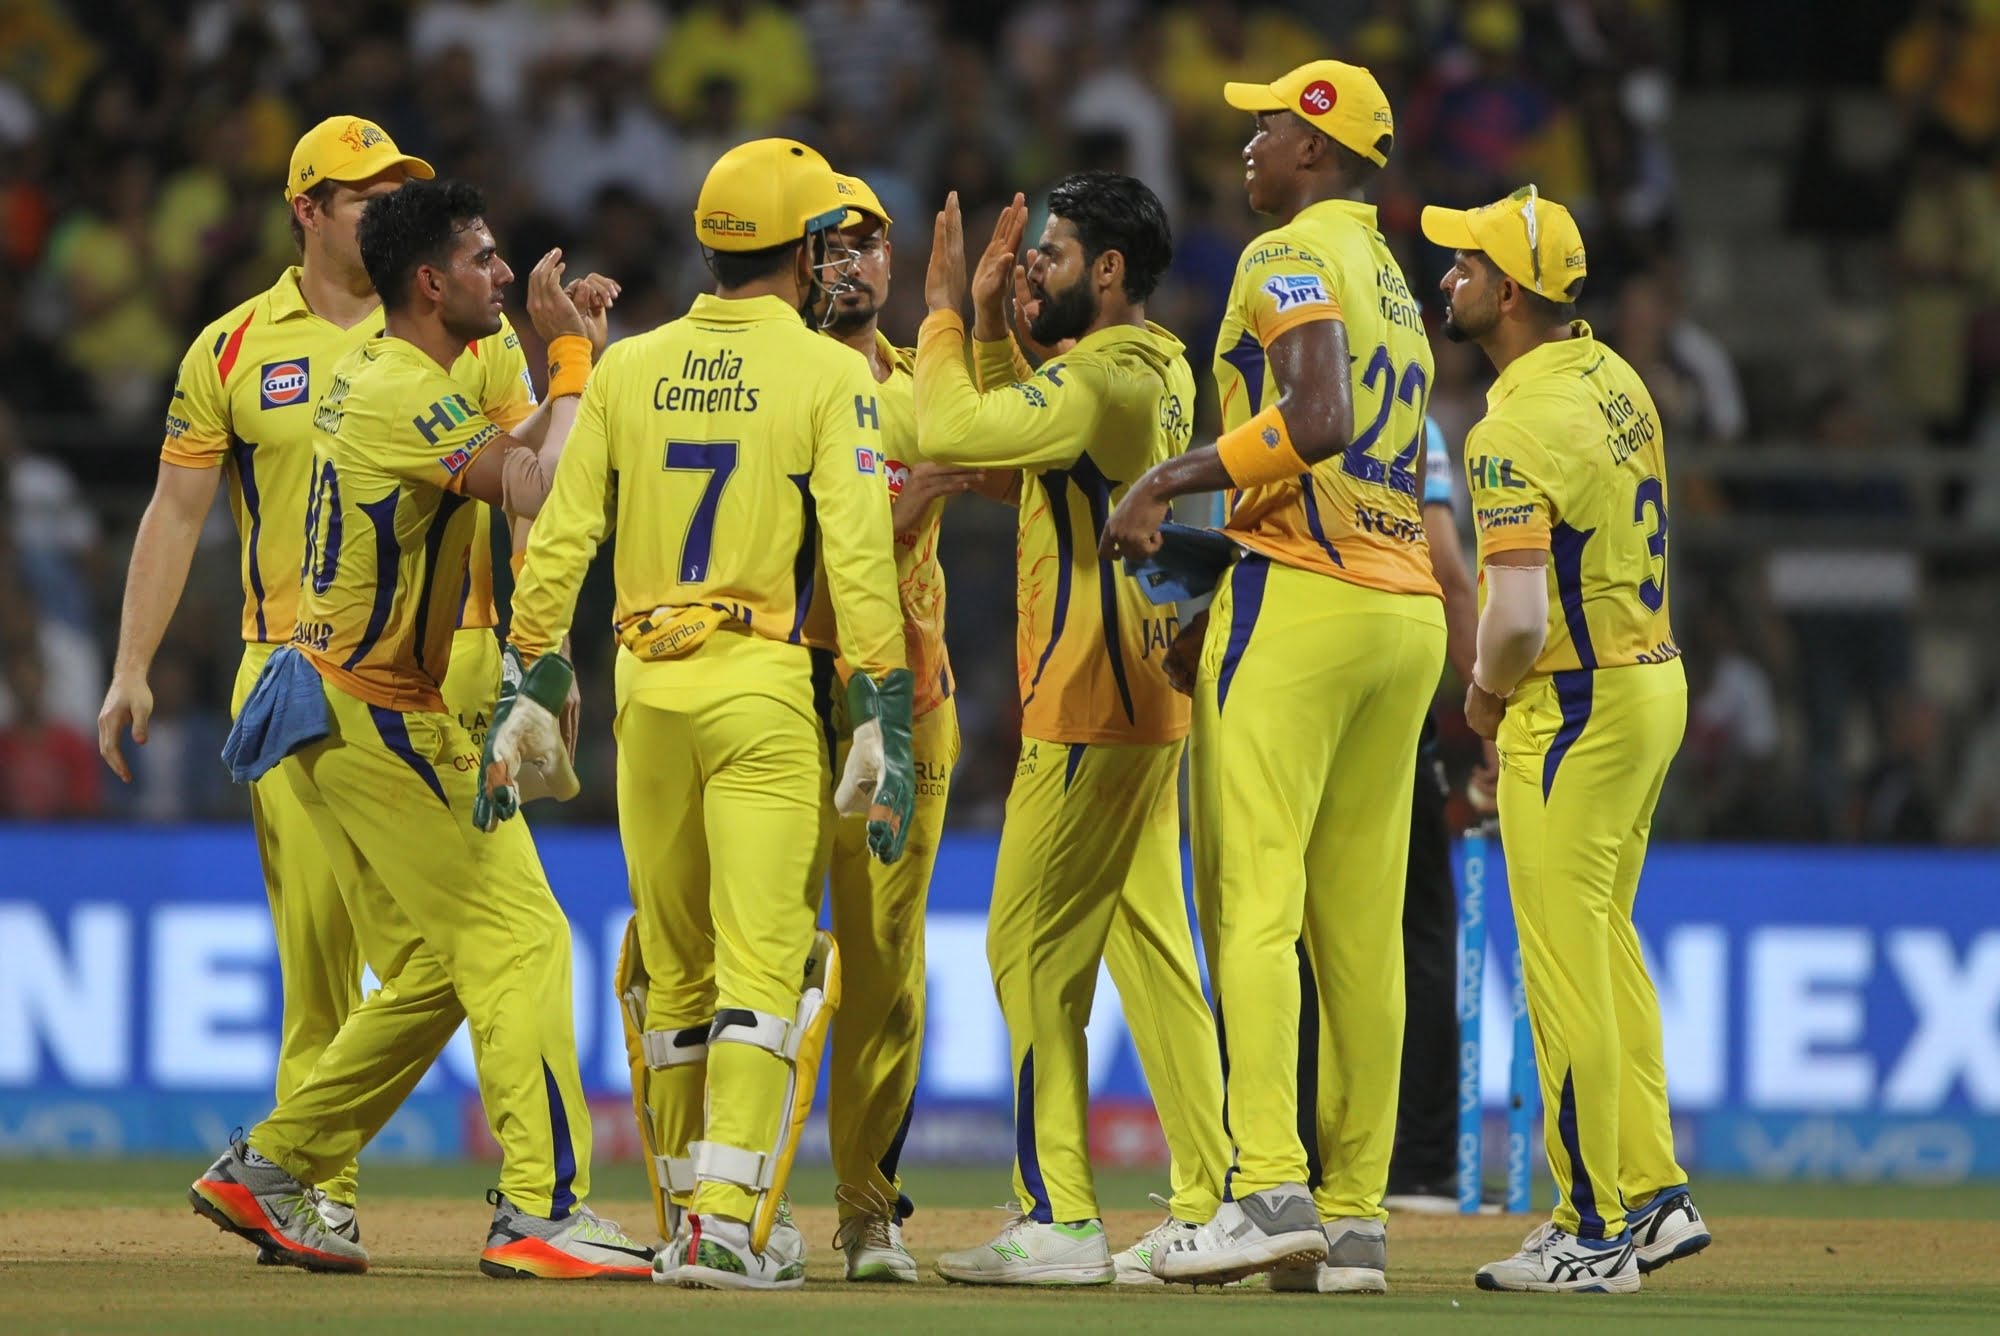 IPL 2019: MS Dhoni Feels CSK Can Make-up For Their Fielding Woes